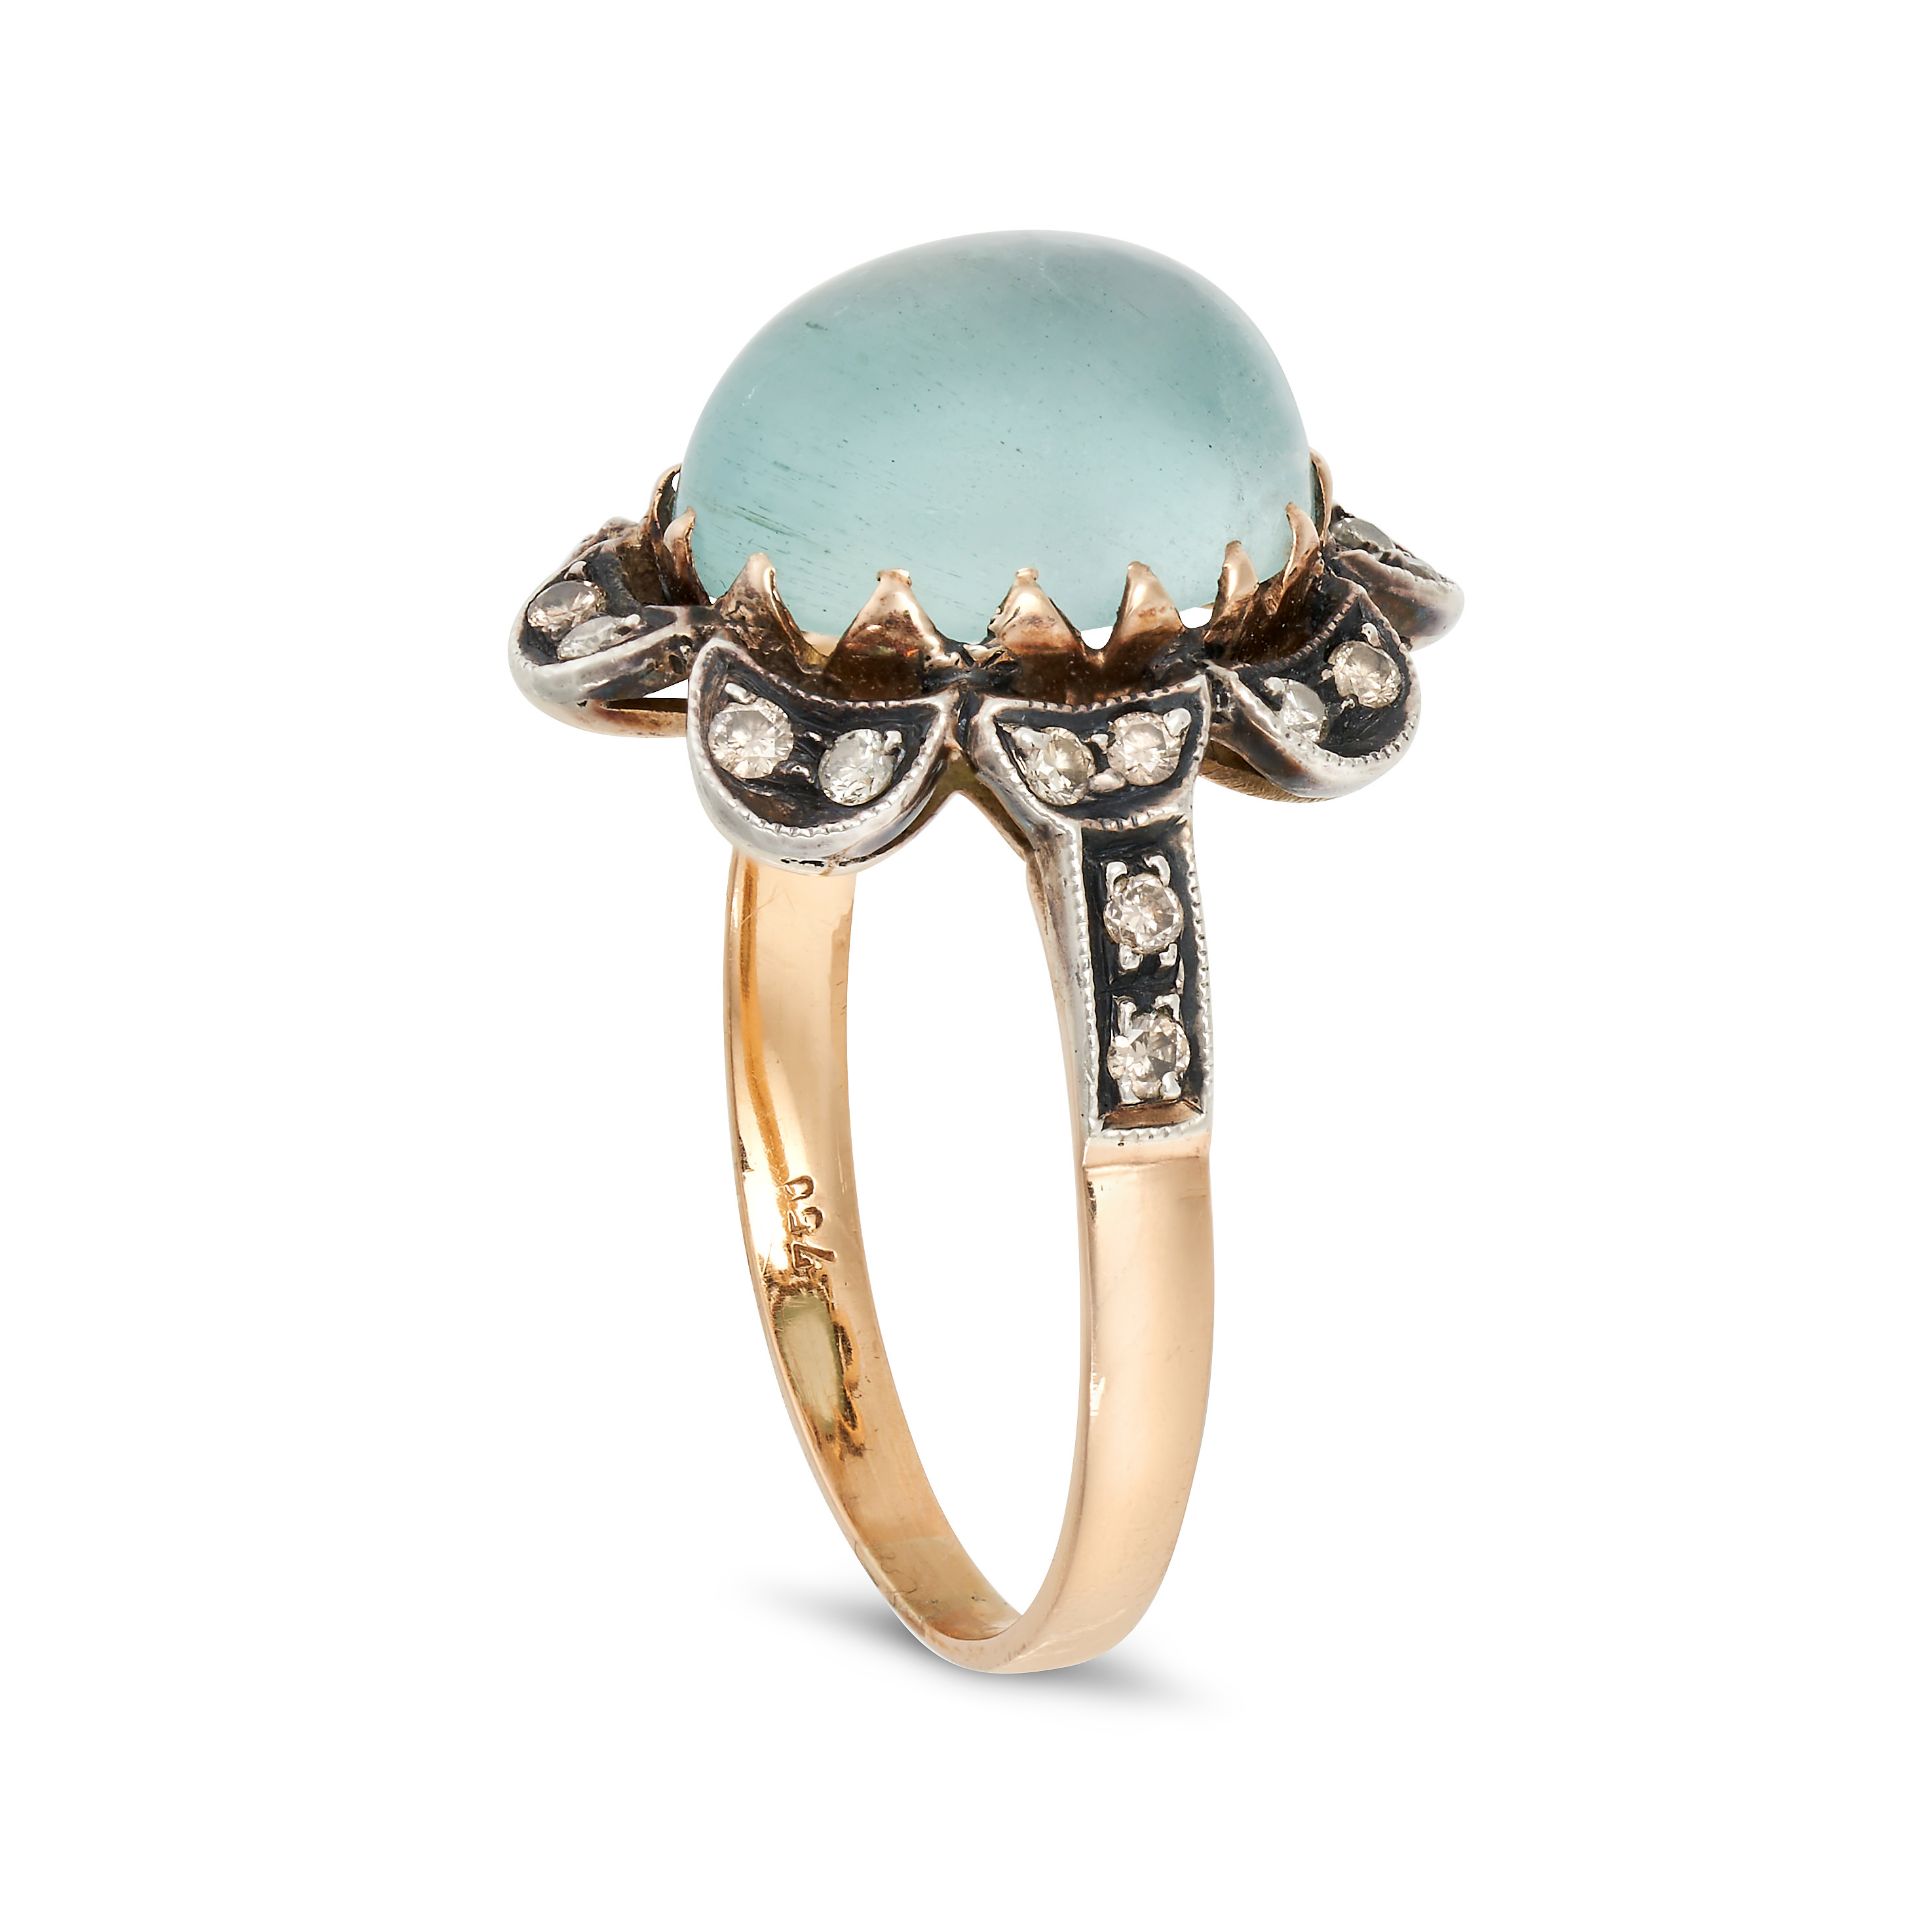 A MOONSTONE AND DIAMOND RING in 18ct yellow gold and silver, set with an oval cabochon moonstone ... - Image 2 of 2